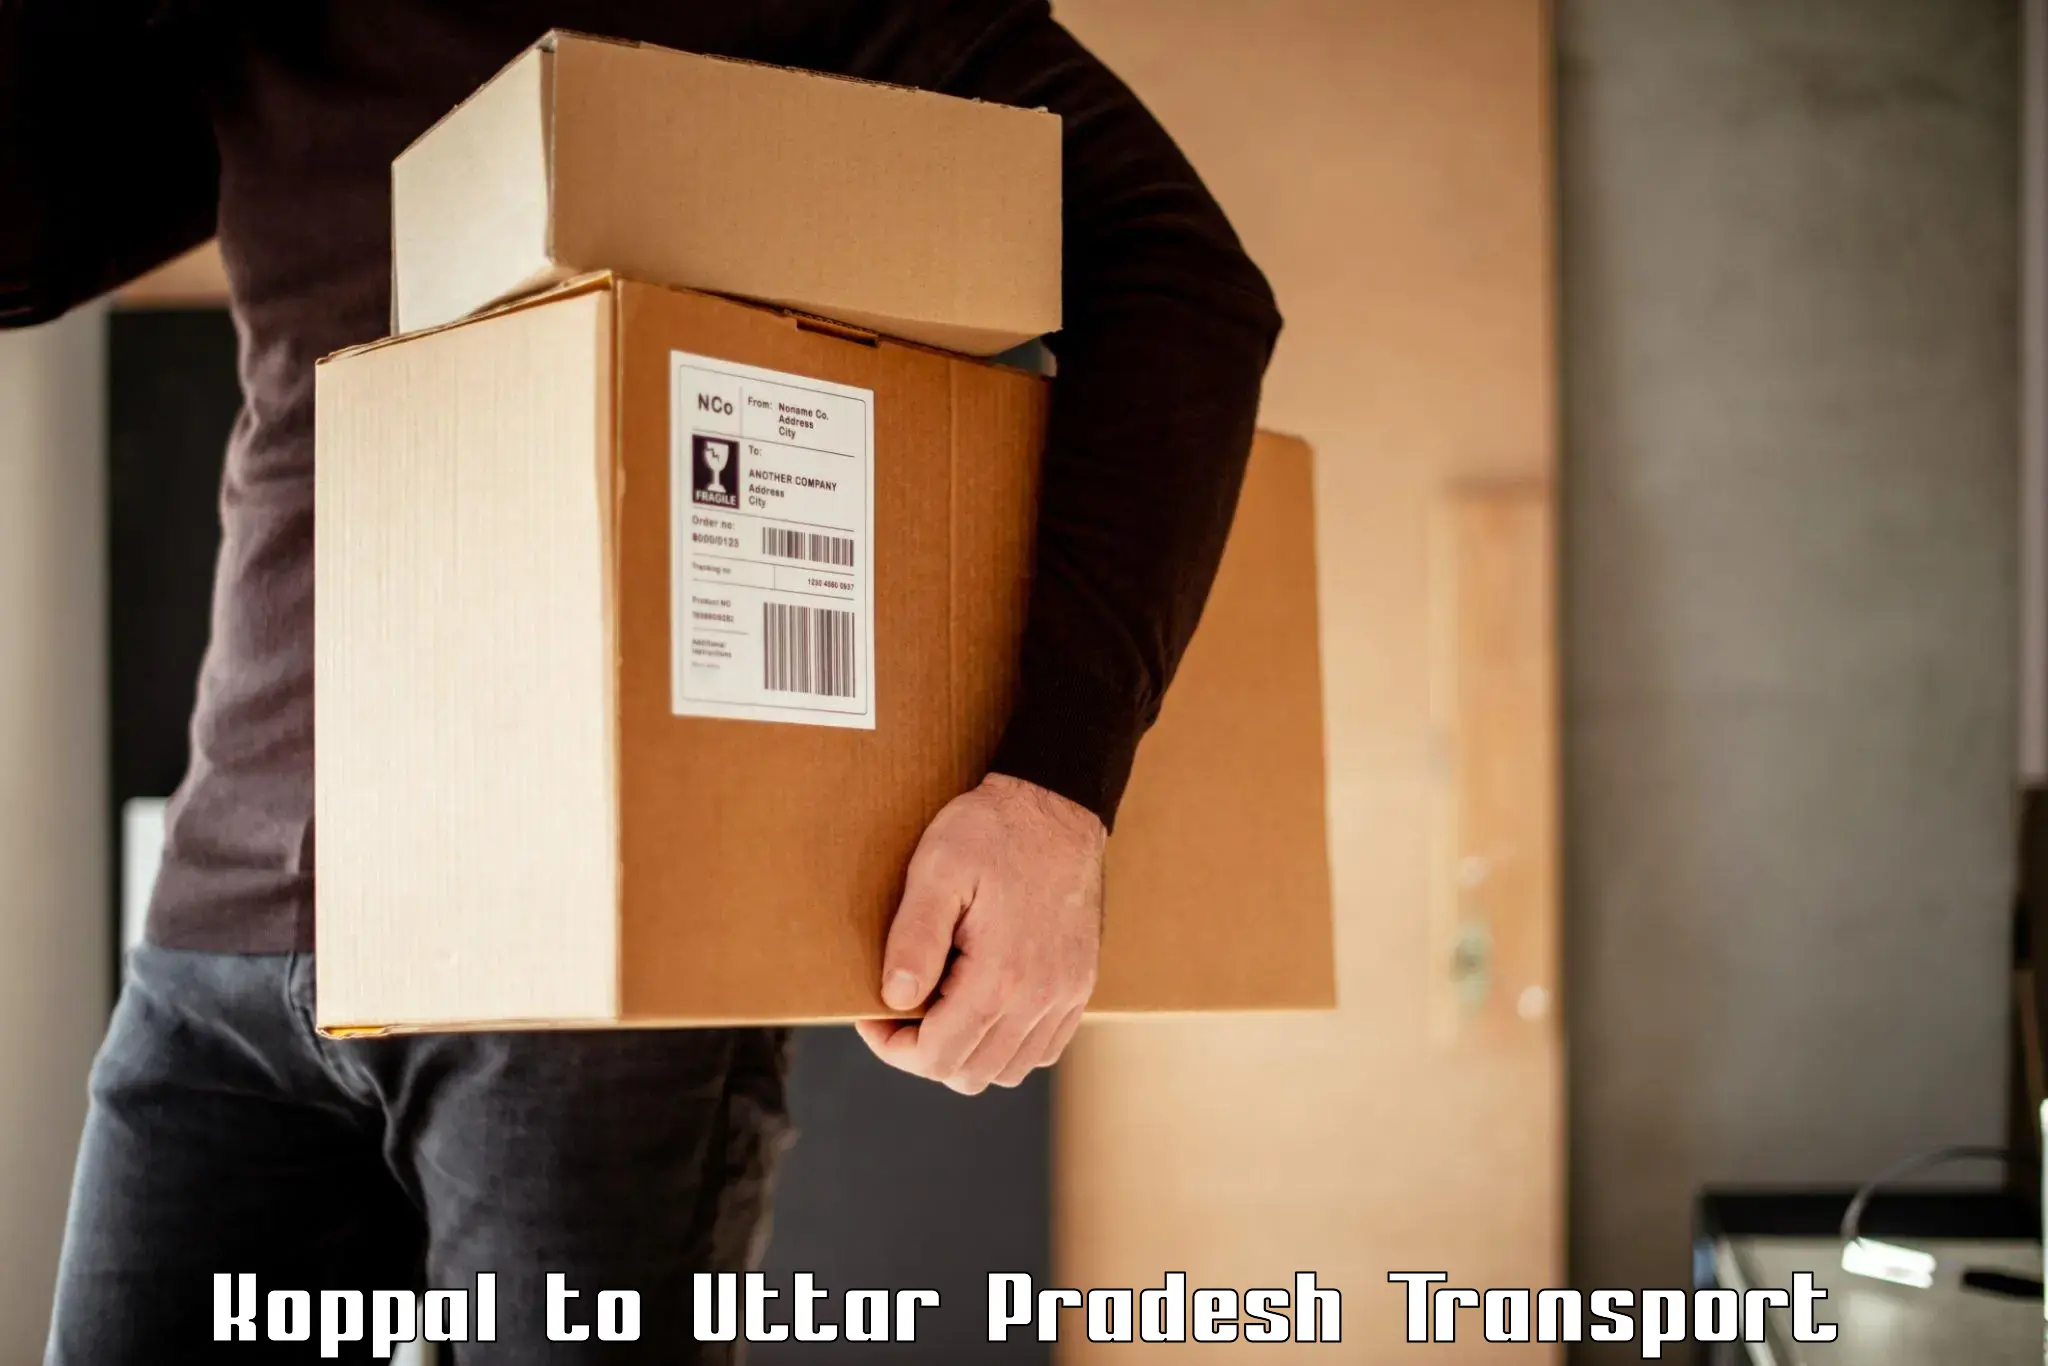 Commercial transport service Koppal to Pilibhit